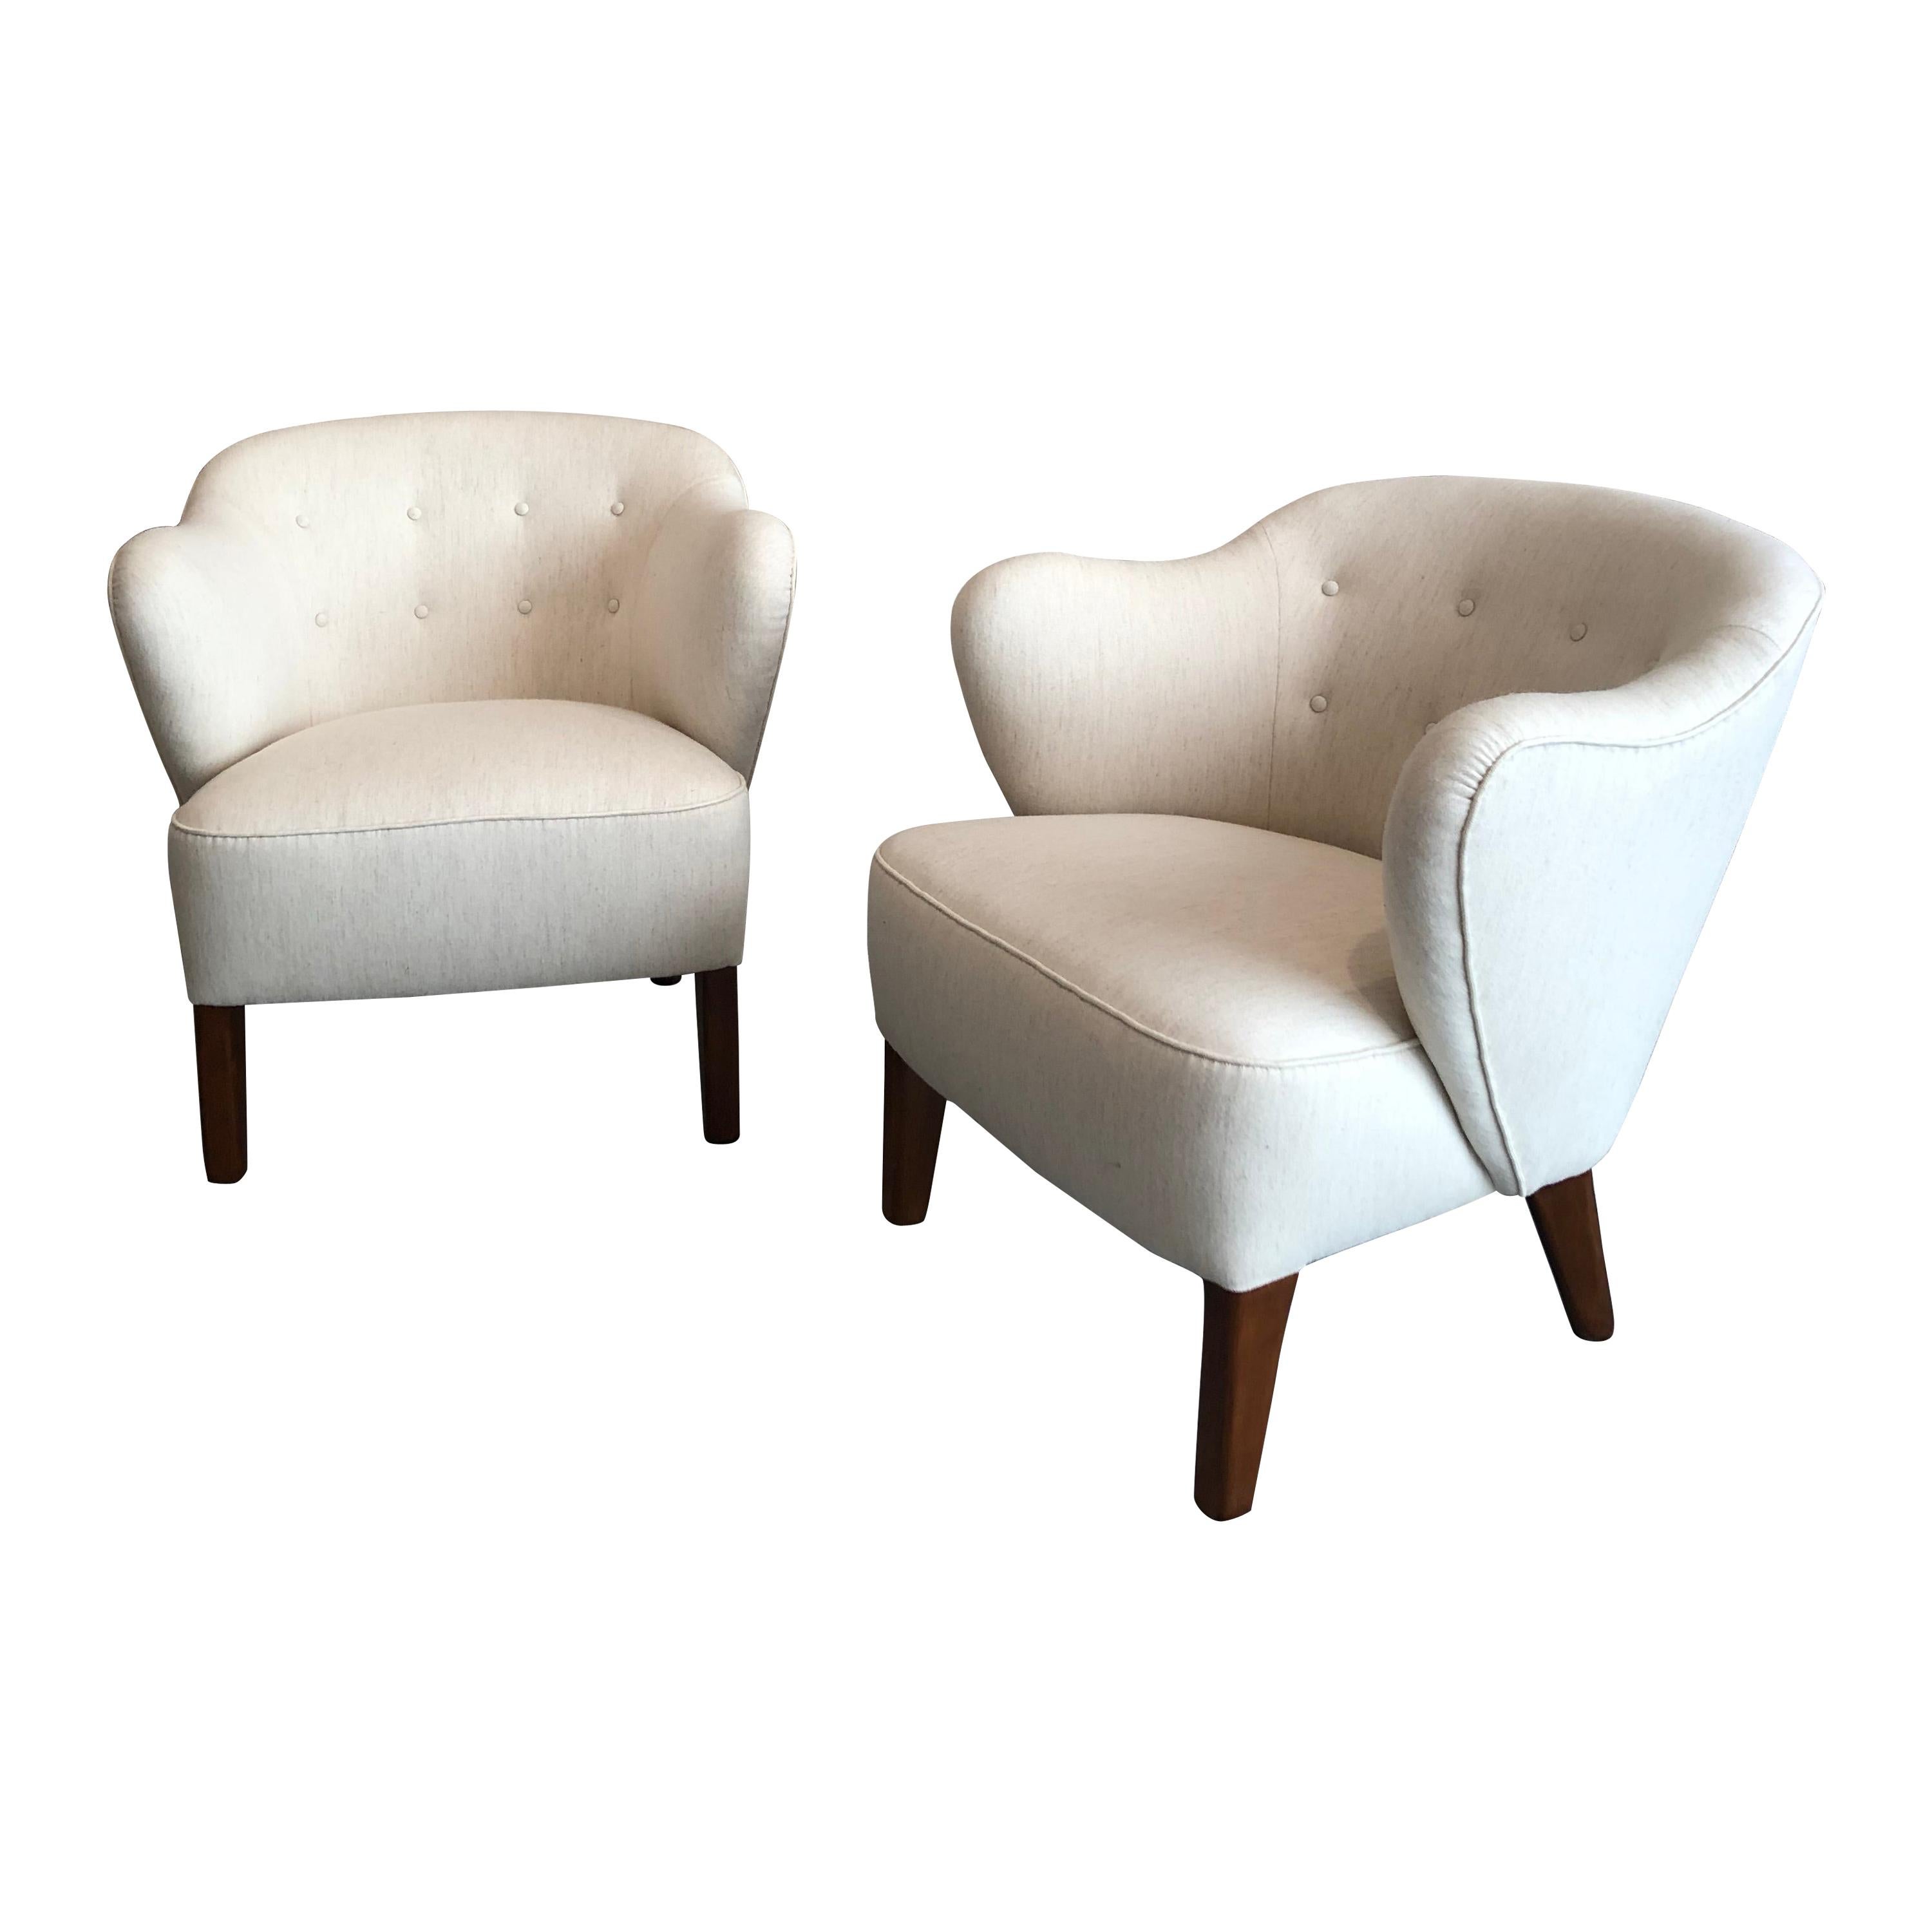 Flemming Lassen Pair of Easy Chairs in White Fabric, 1940s For Sale